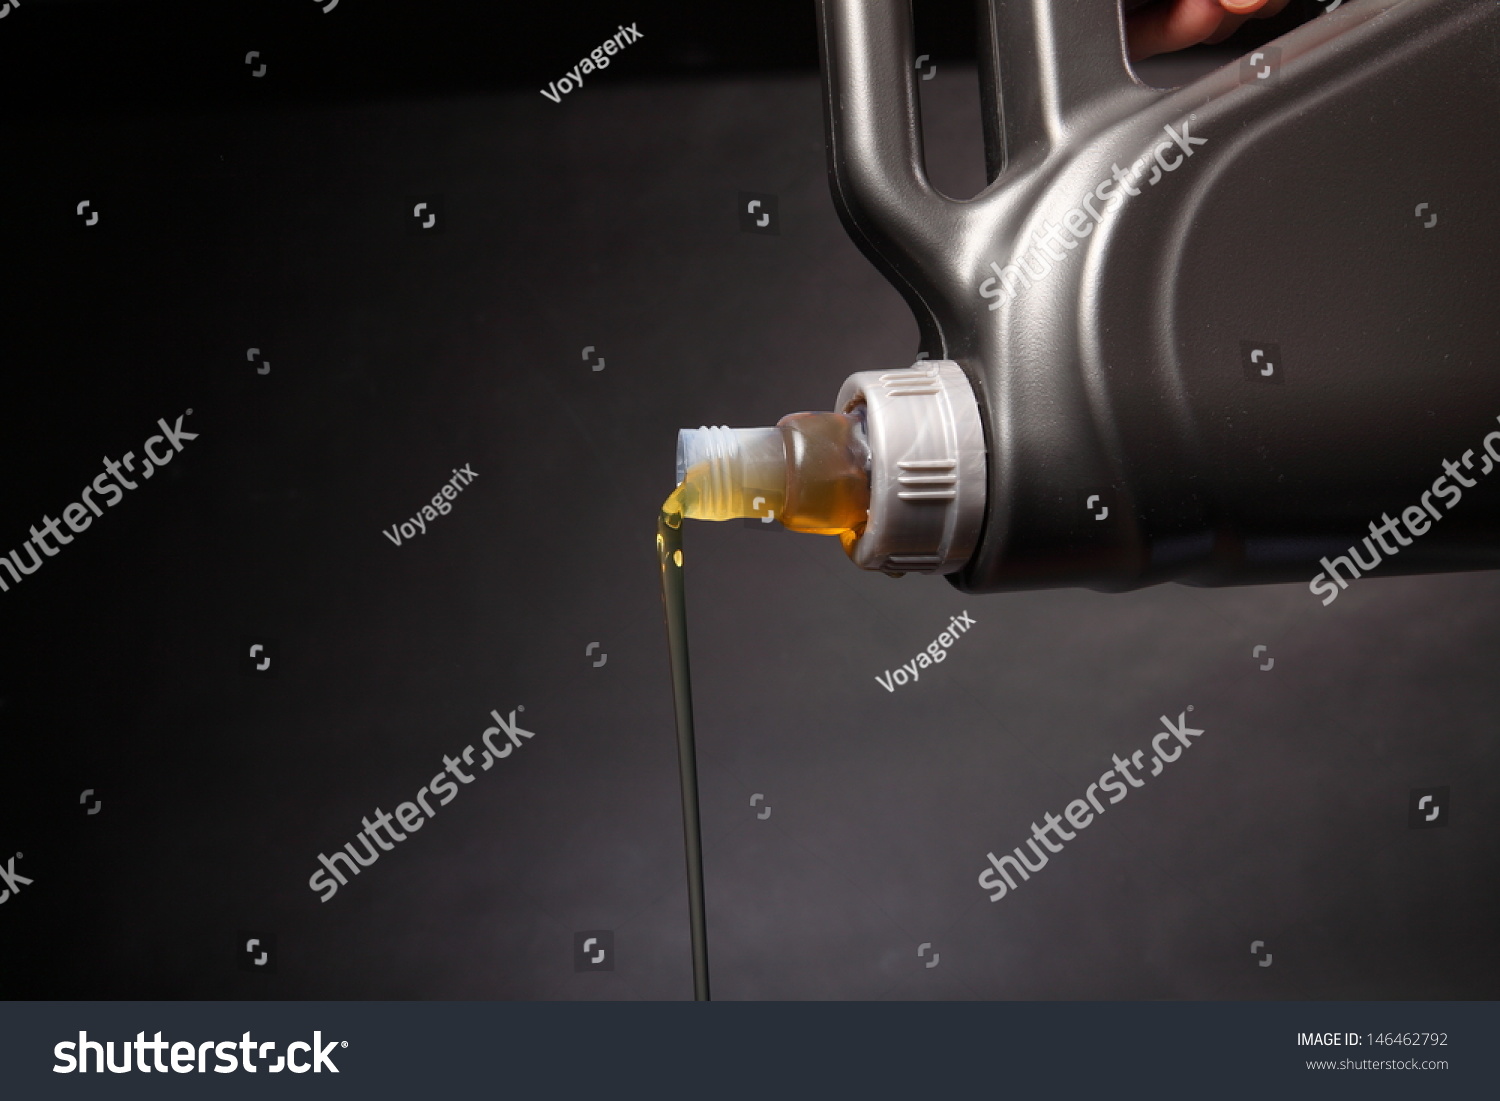 http://image.shutterstock.com/z/stock-photo-can-with-car-engine-oil-pouring-in-front-black-background-146462792.jpg